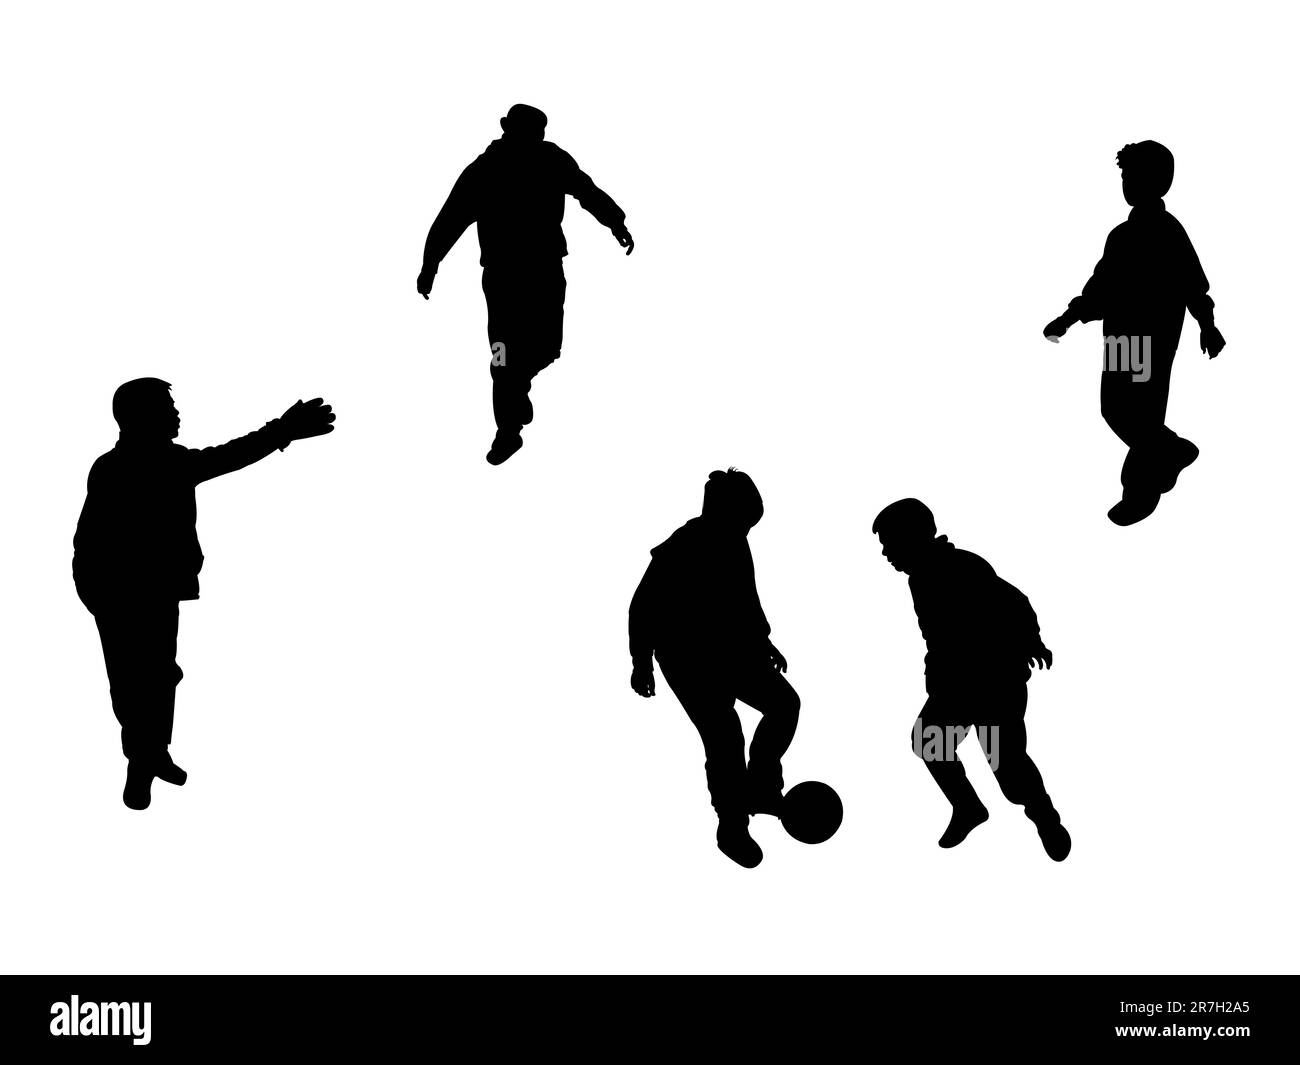 football players silhouettes over white background, abstract vector art illustration Stock Vector